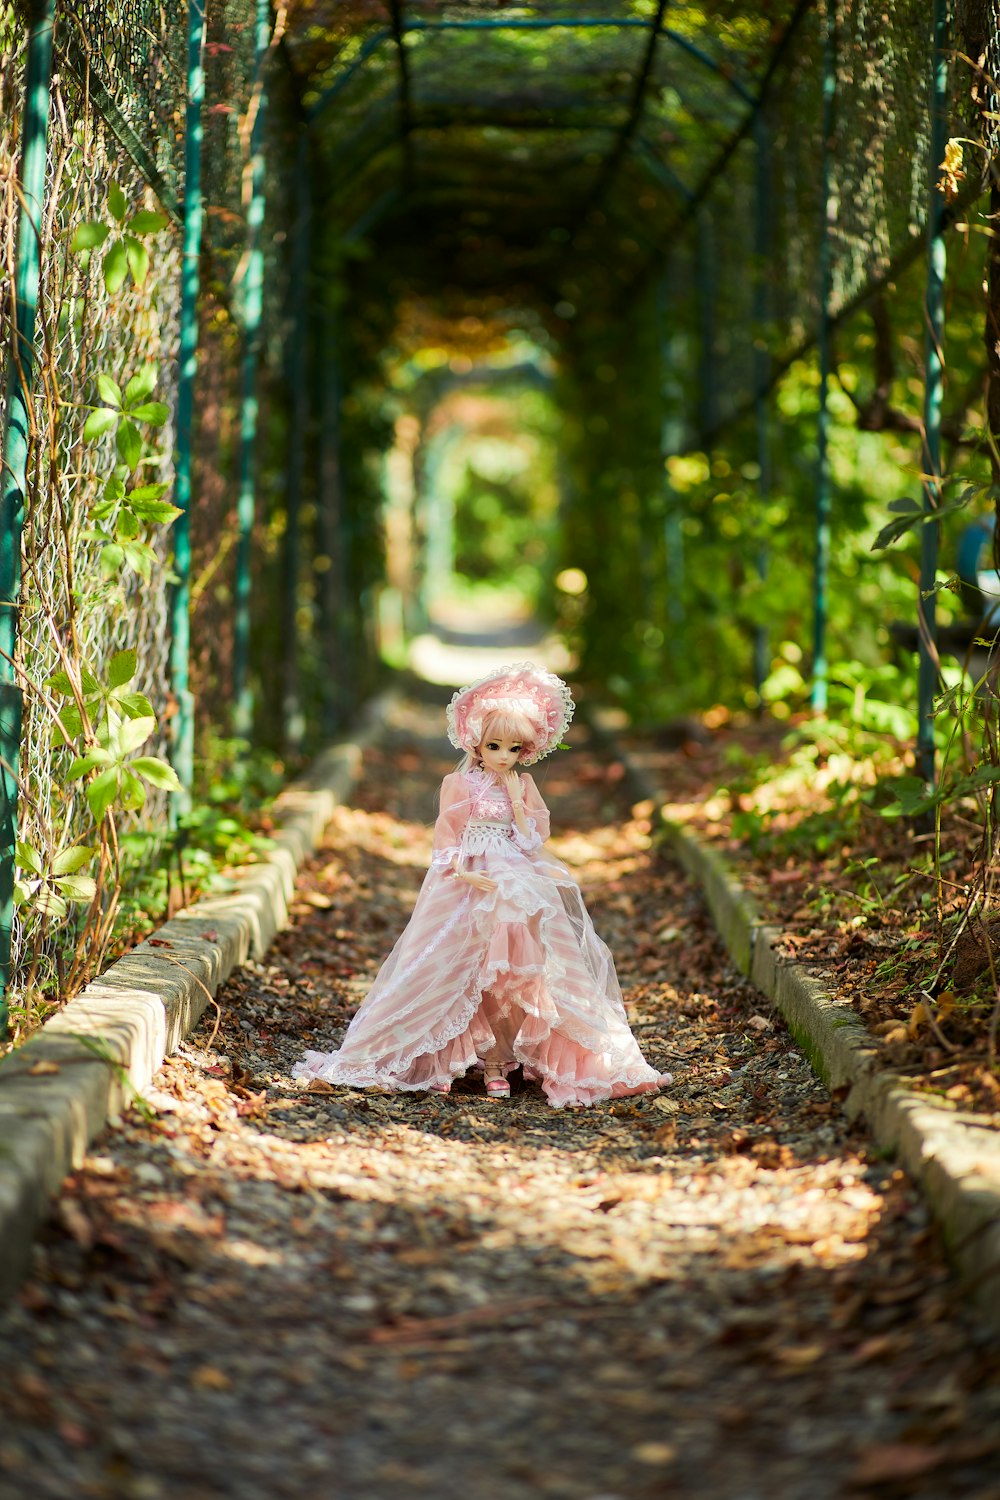 girl in white dress walking on brown pathway surrounded by green trees during daytime